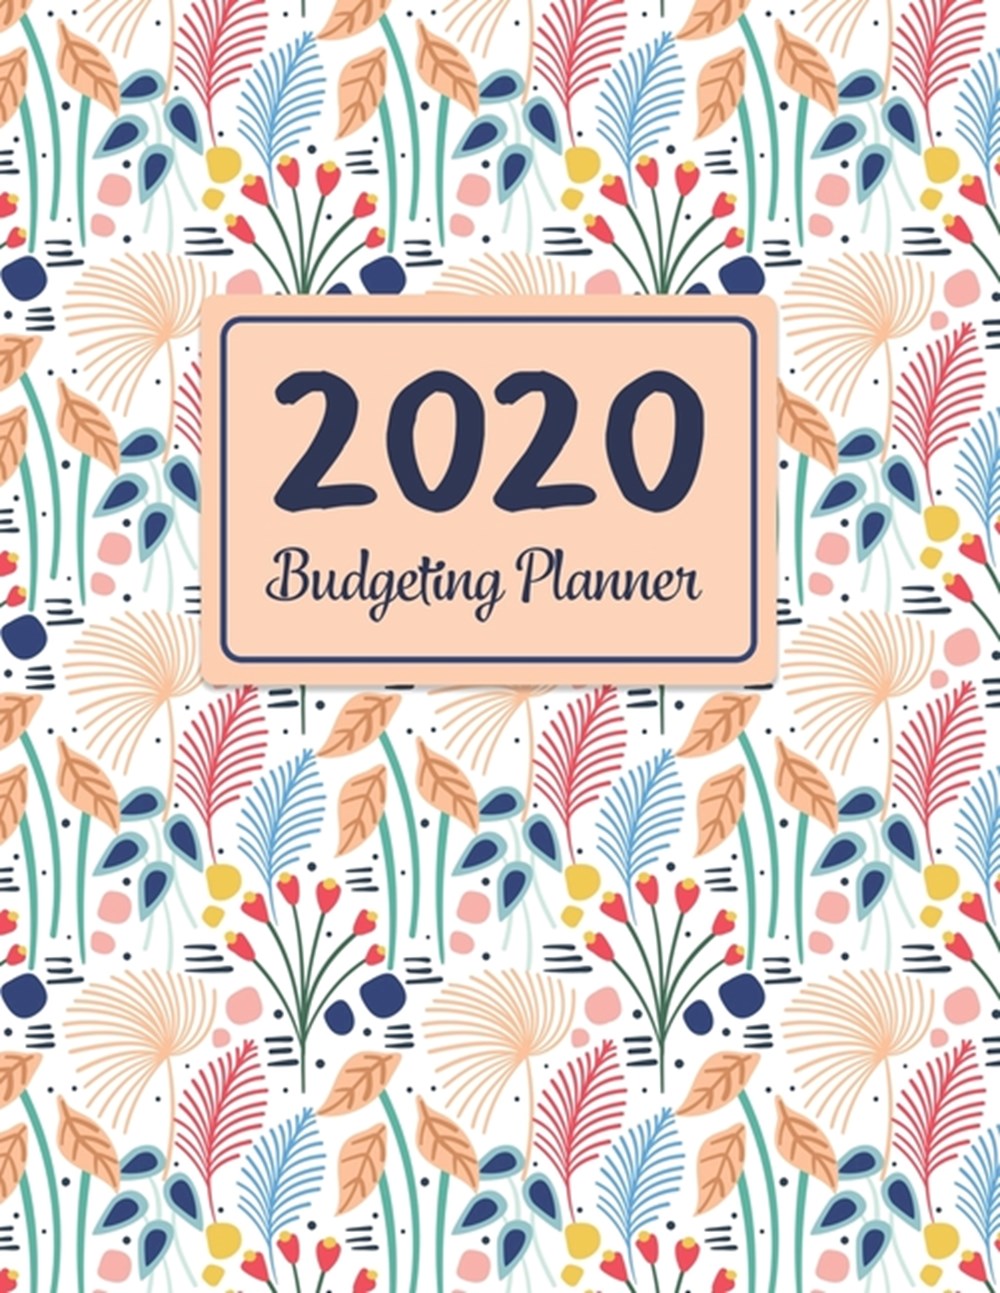 2020 Budgeting Planner Floral Daily Weekly & Monthly Financial Expense Tracker And Bill Organizer Wi